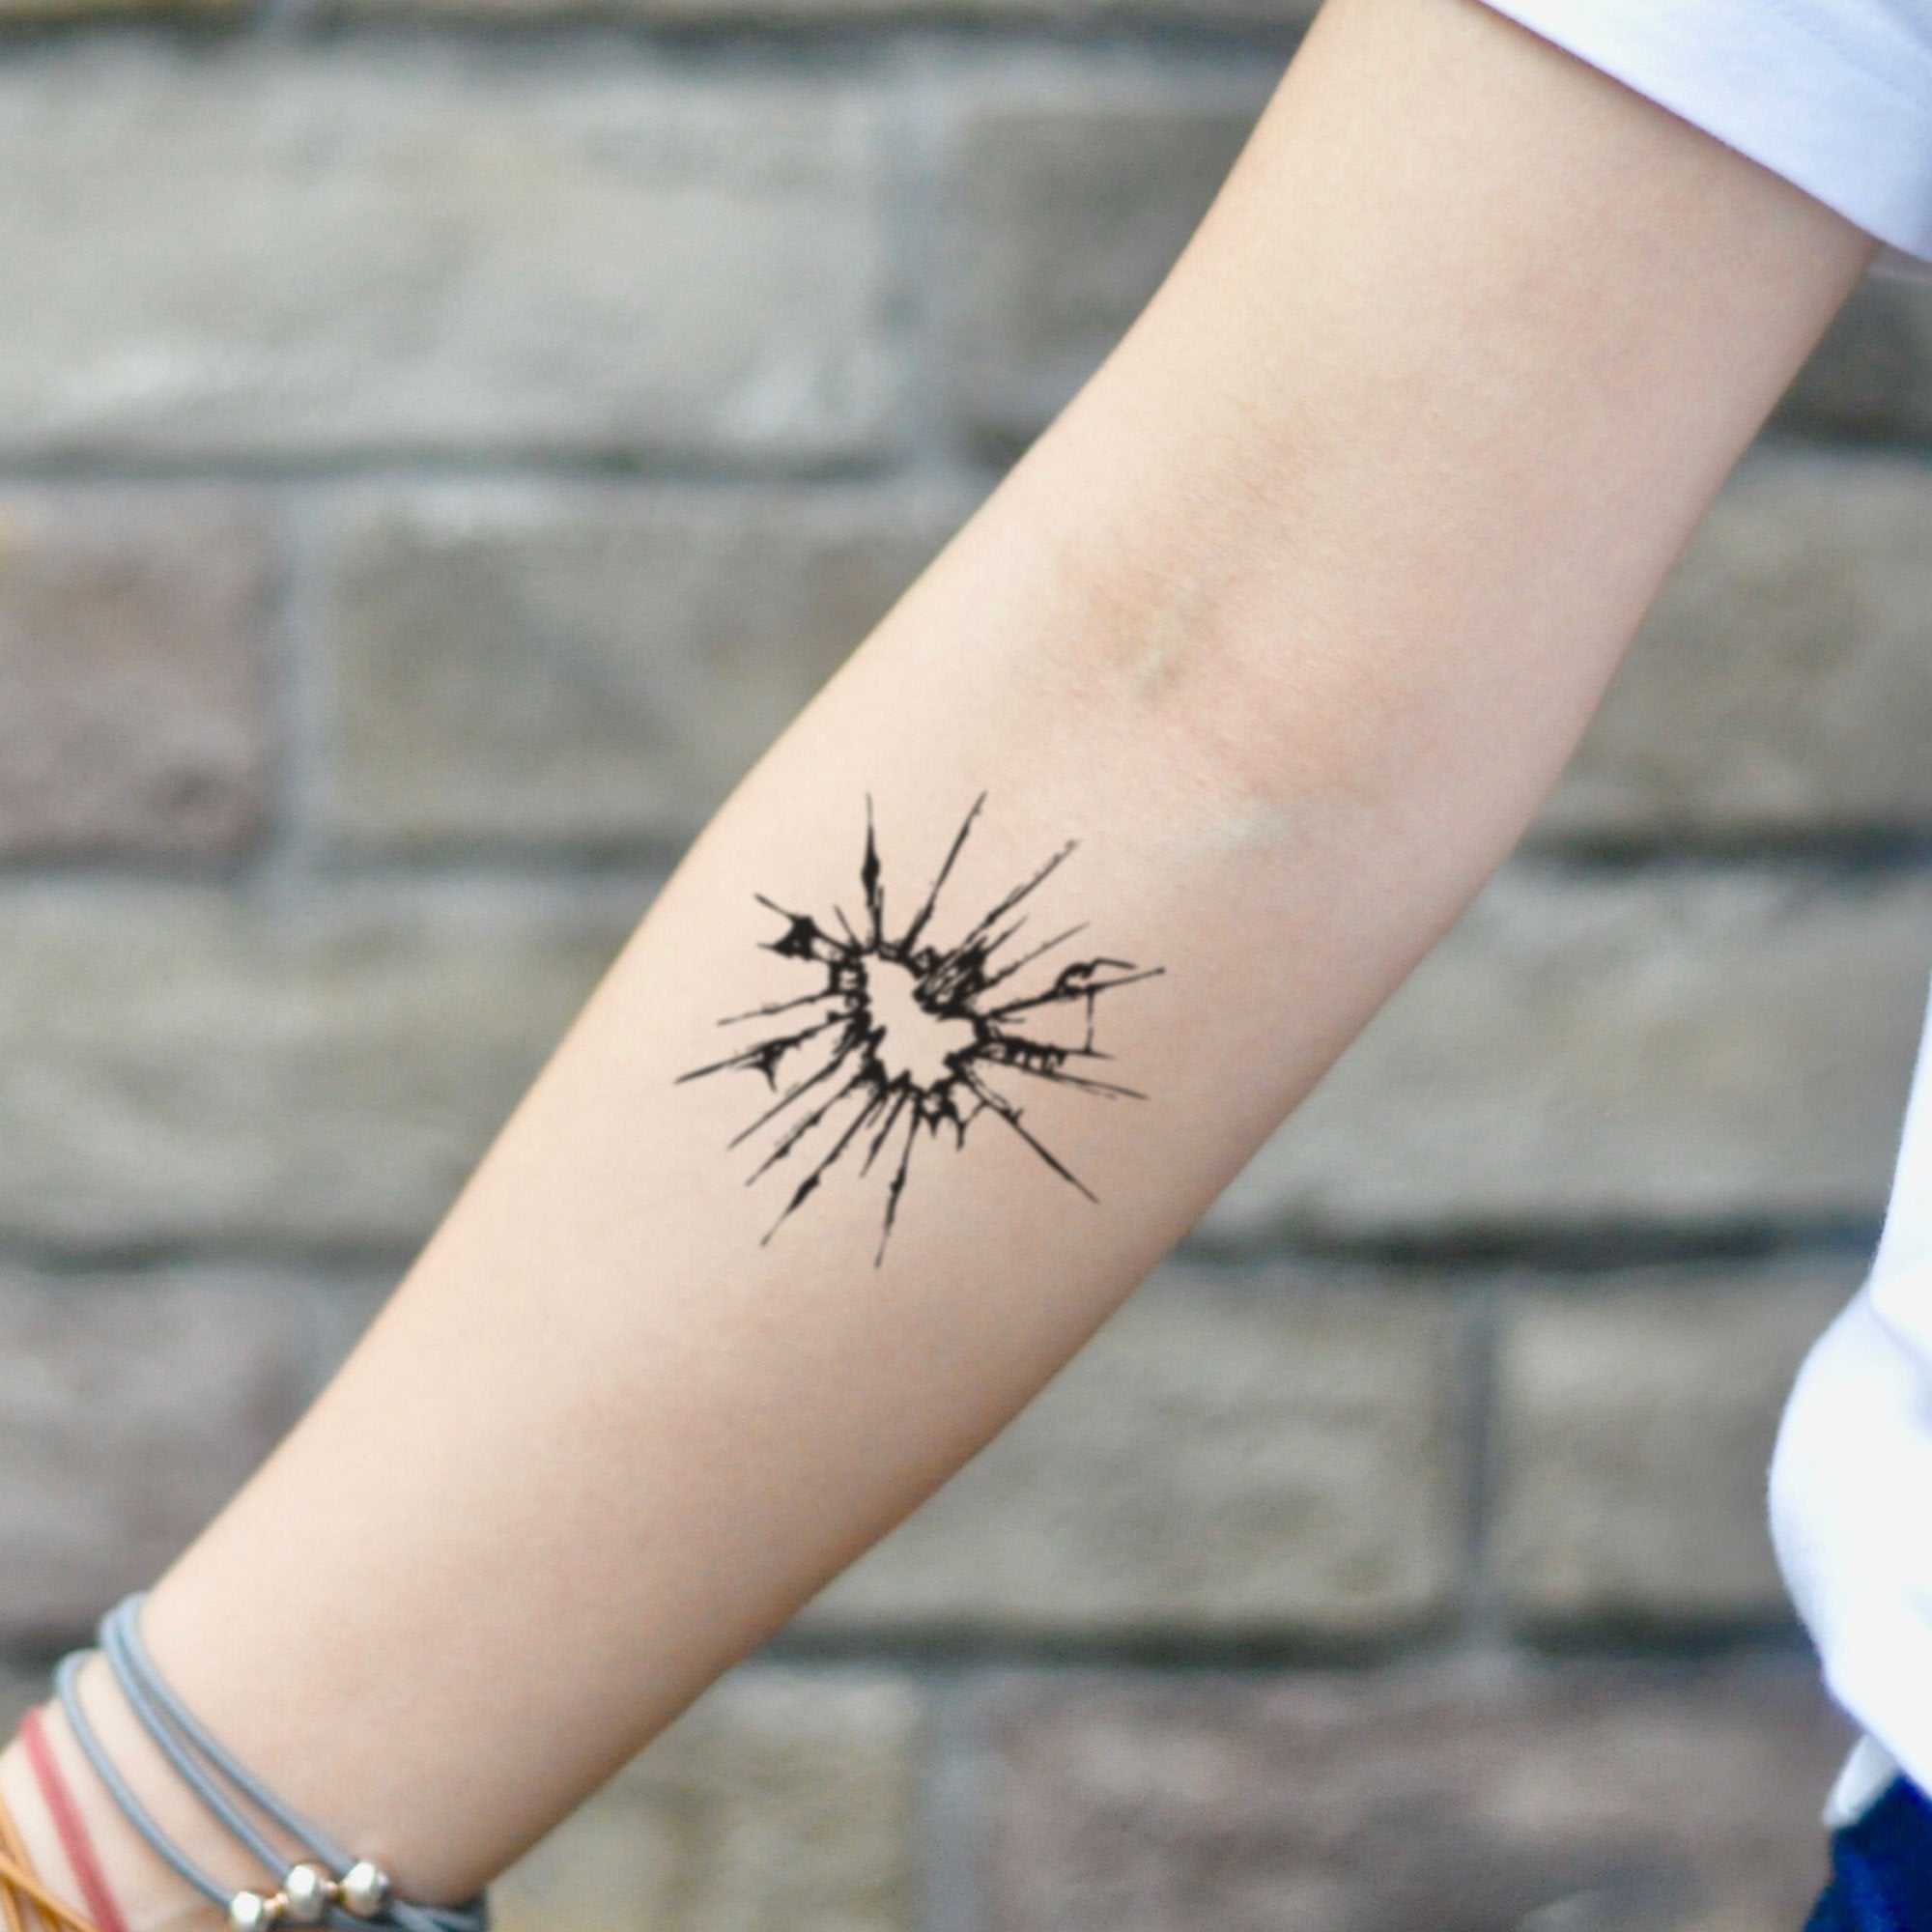 Buy Shattered Glass Temporary Tattoo Sticker set of 2 Online in India - Etsy